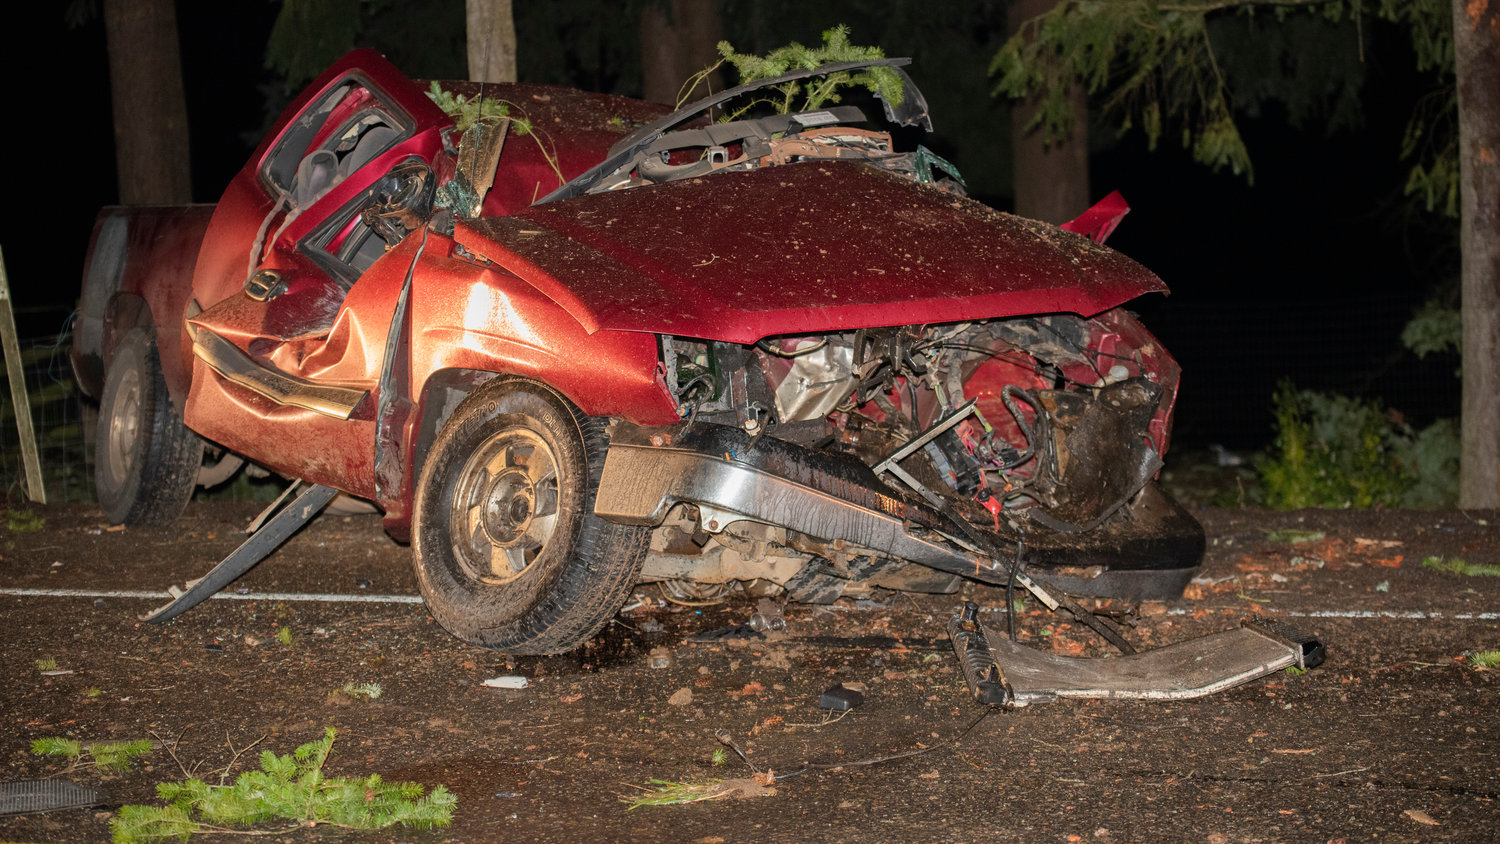 Branches are seen on a vehicle following a crash along Jackson Highway in Chehalis Wednesday night.